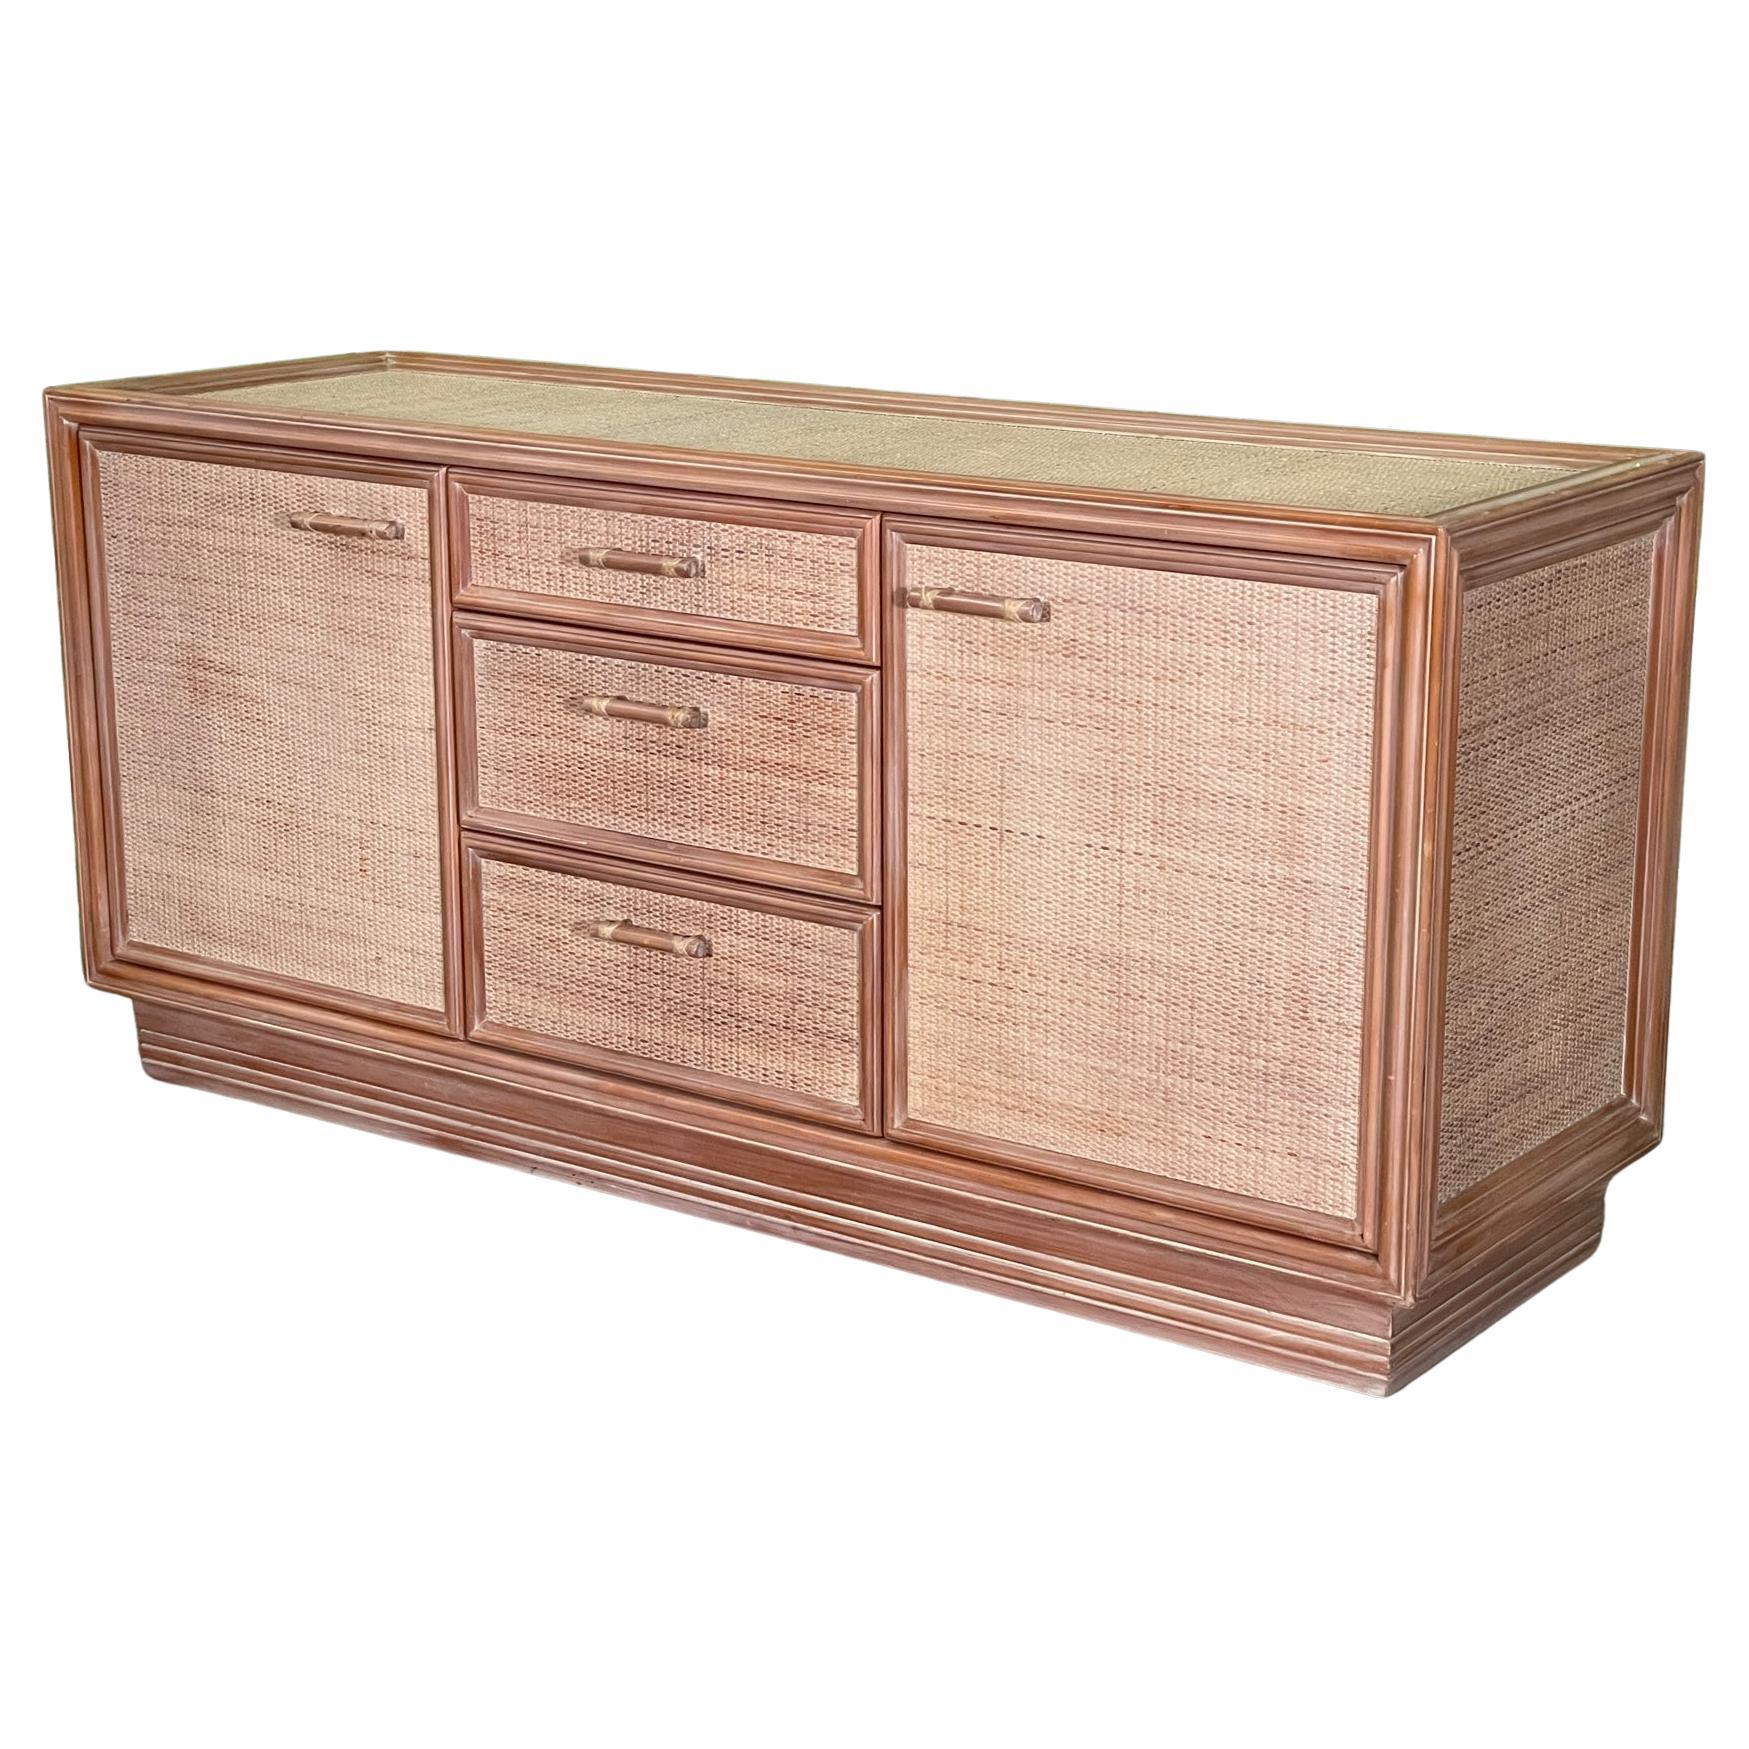 Rattan and Wicker Sideboard or Buffet Attribute to McGuire